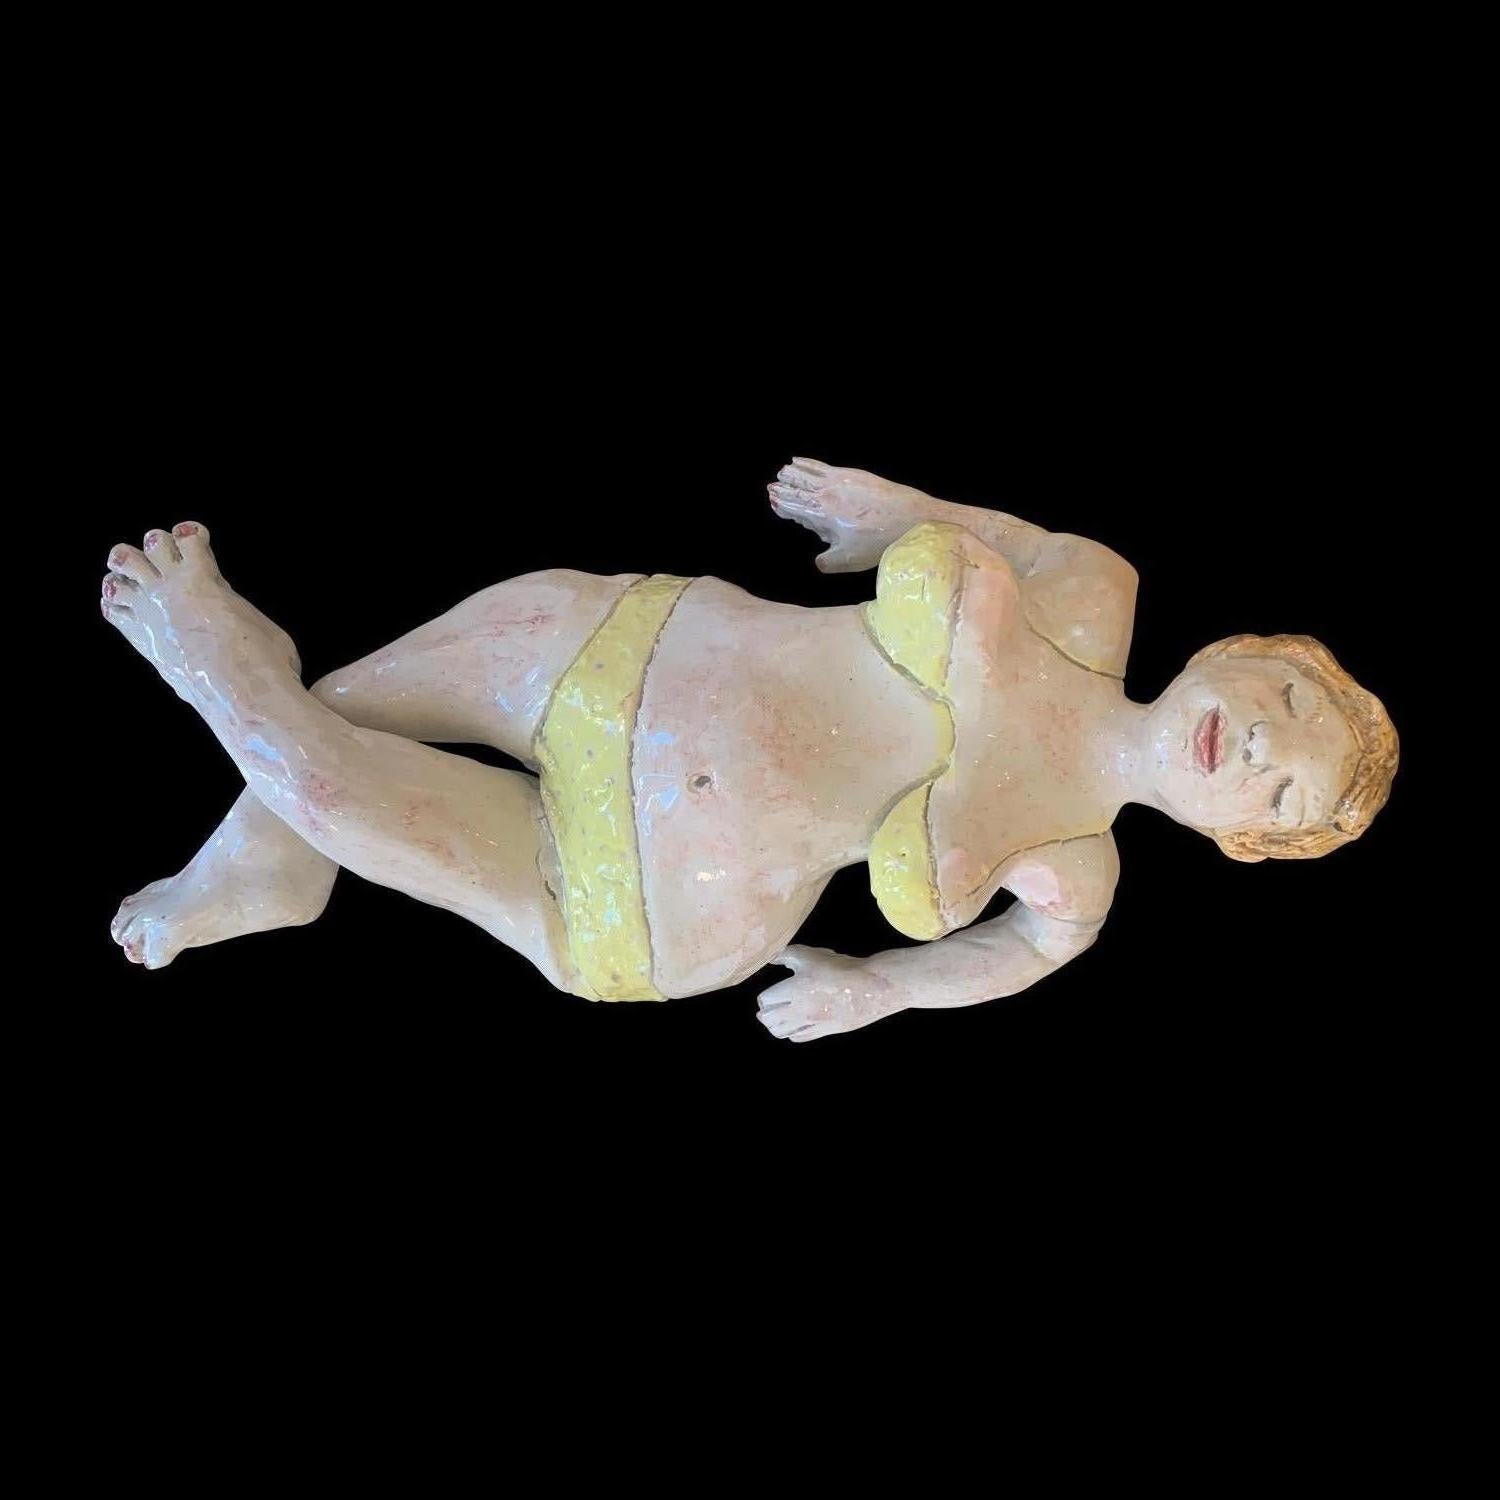 Woman Sunbathing With Yellow Swimsuit Glazed Ceramic Sculpture 1 of 1 by Adi - Black Figurative Sculpture by Adi Rom